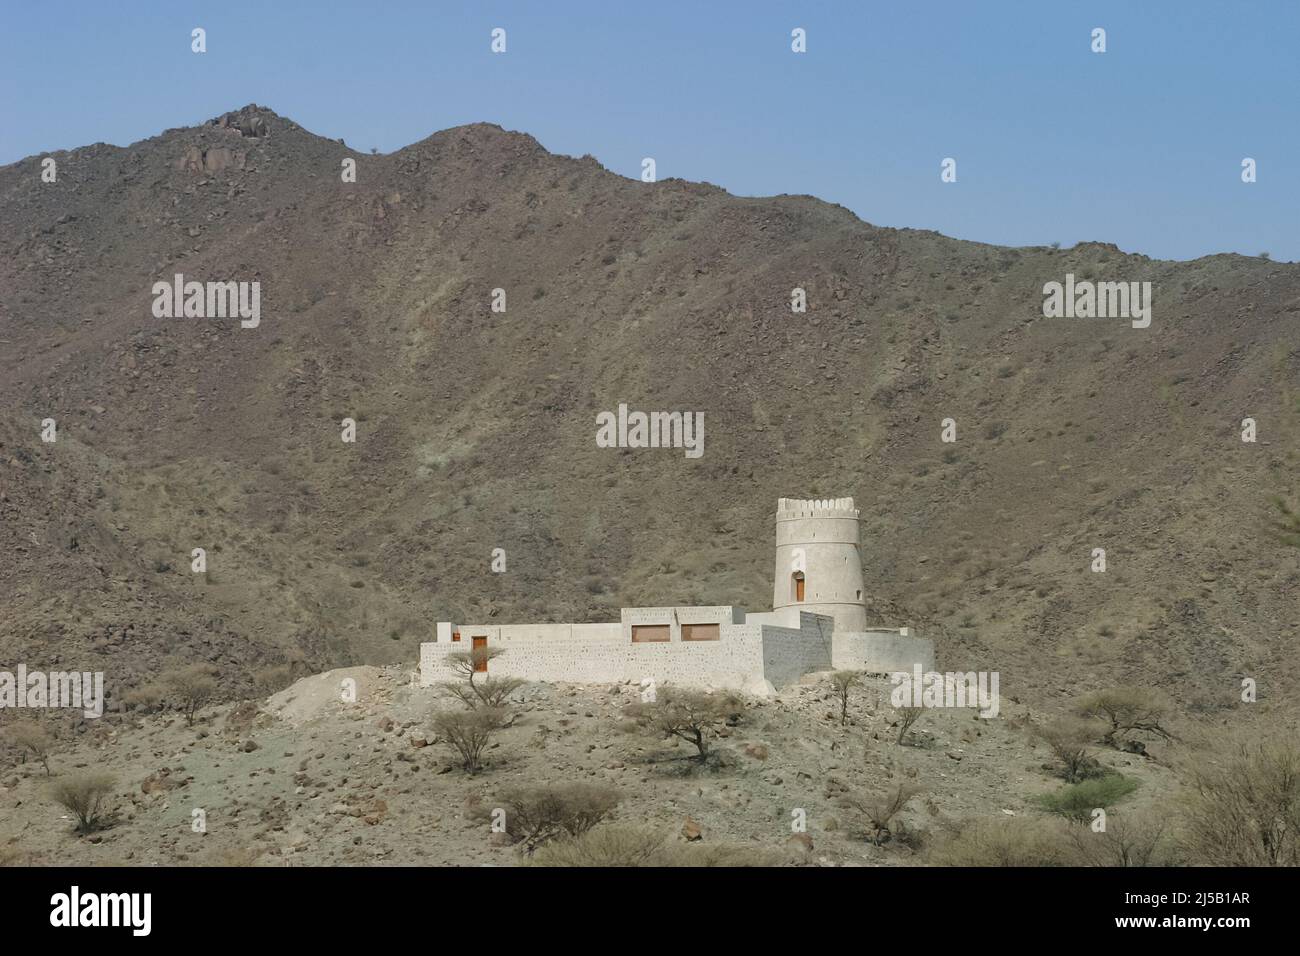 A solitary hilltop fort in the interior of the east coast of the Emirate of Sharjah in the United Arab Emirates. Stock Photo